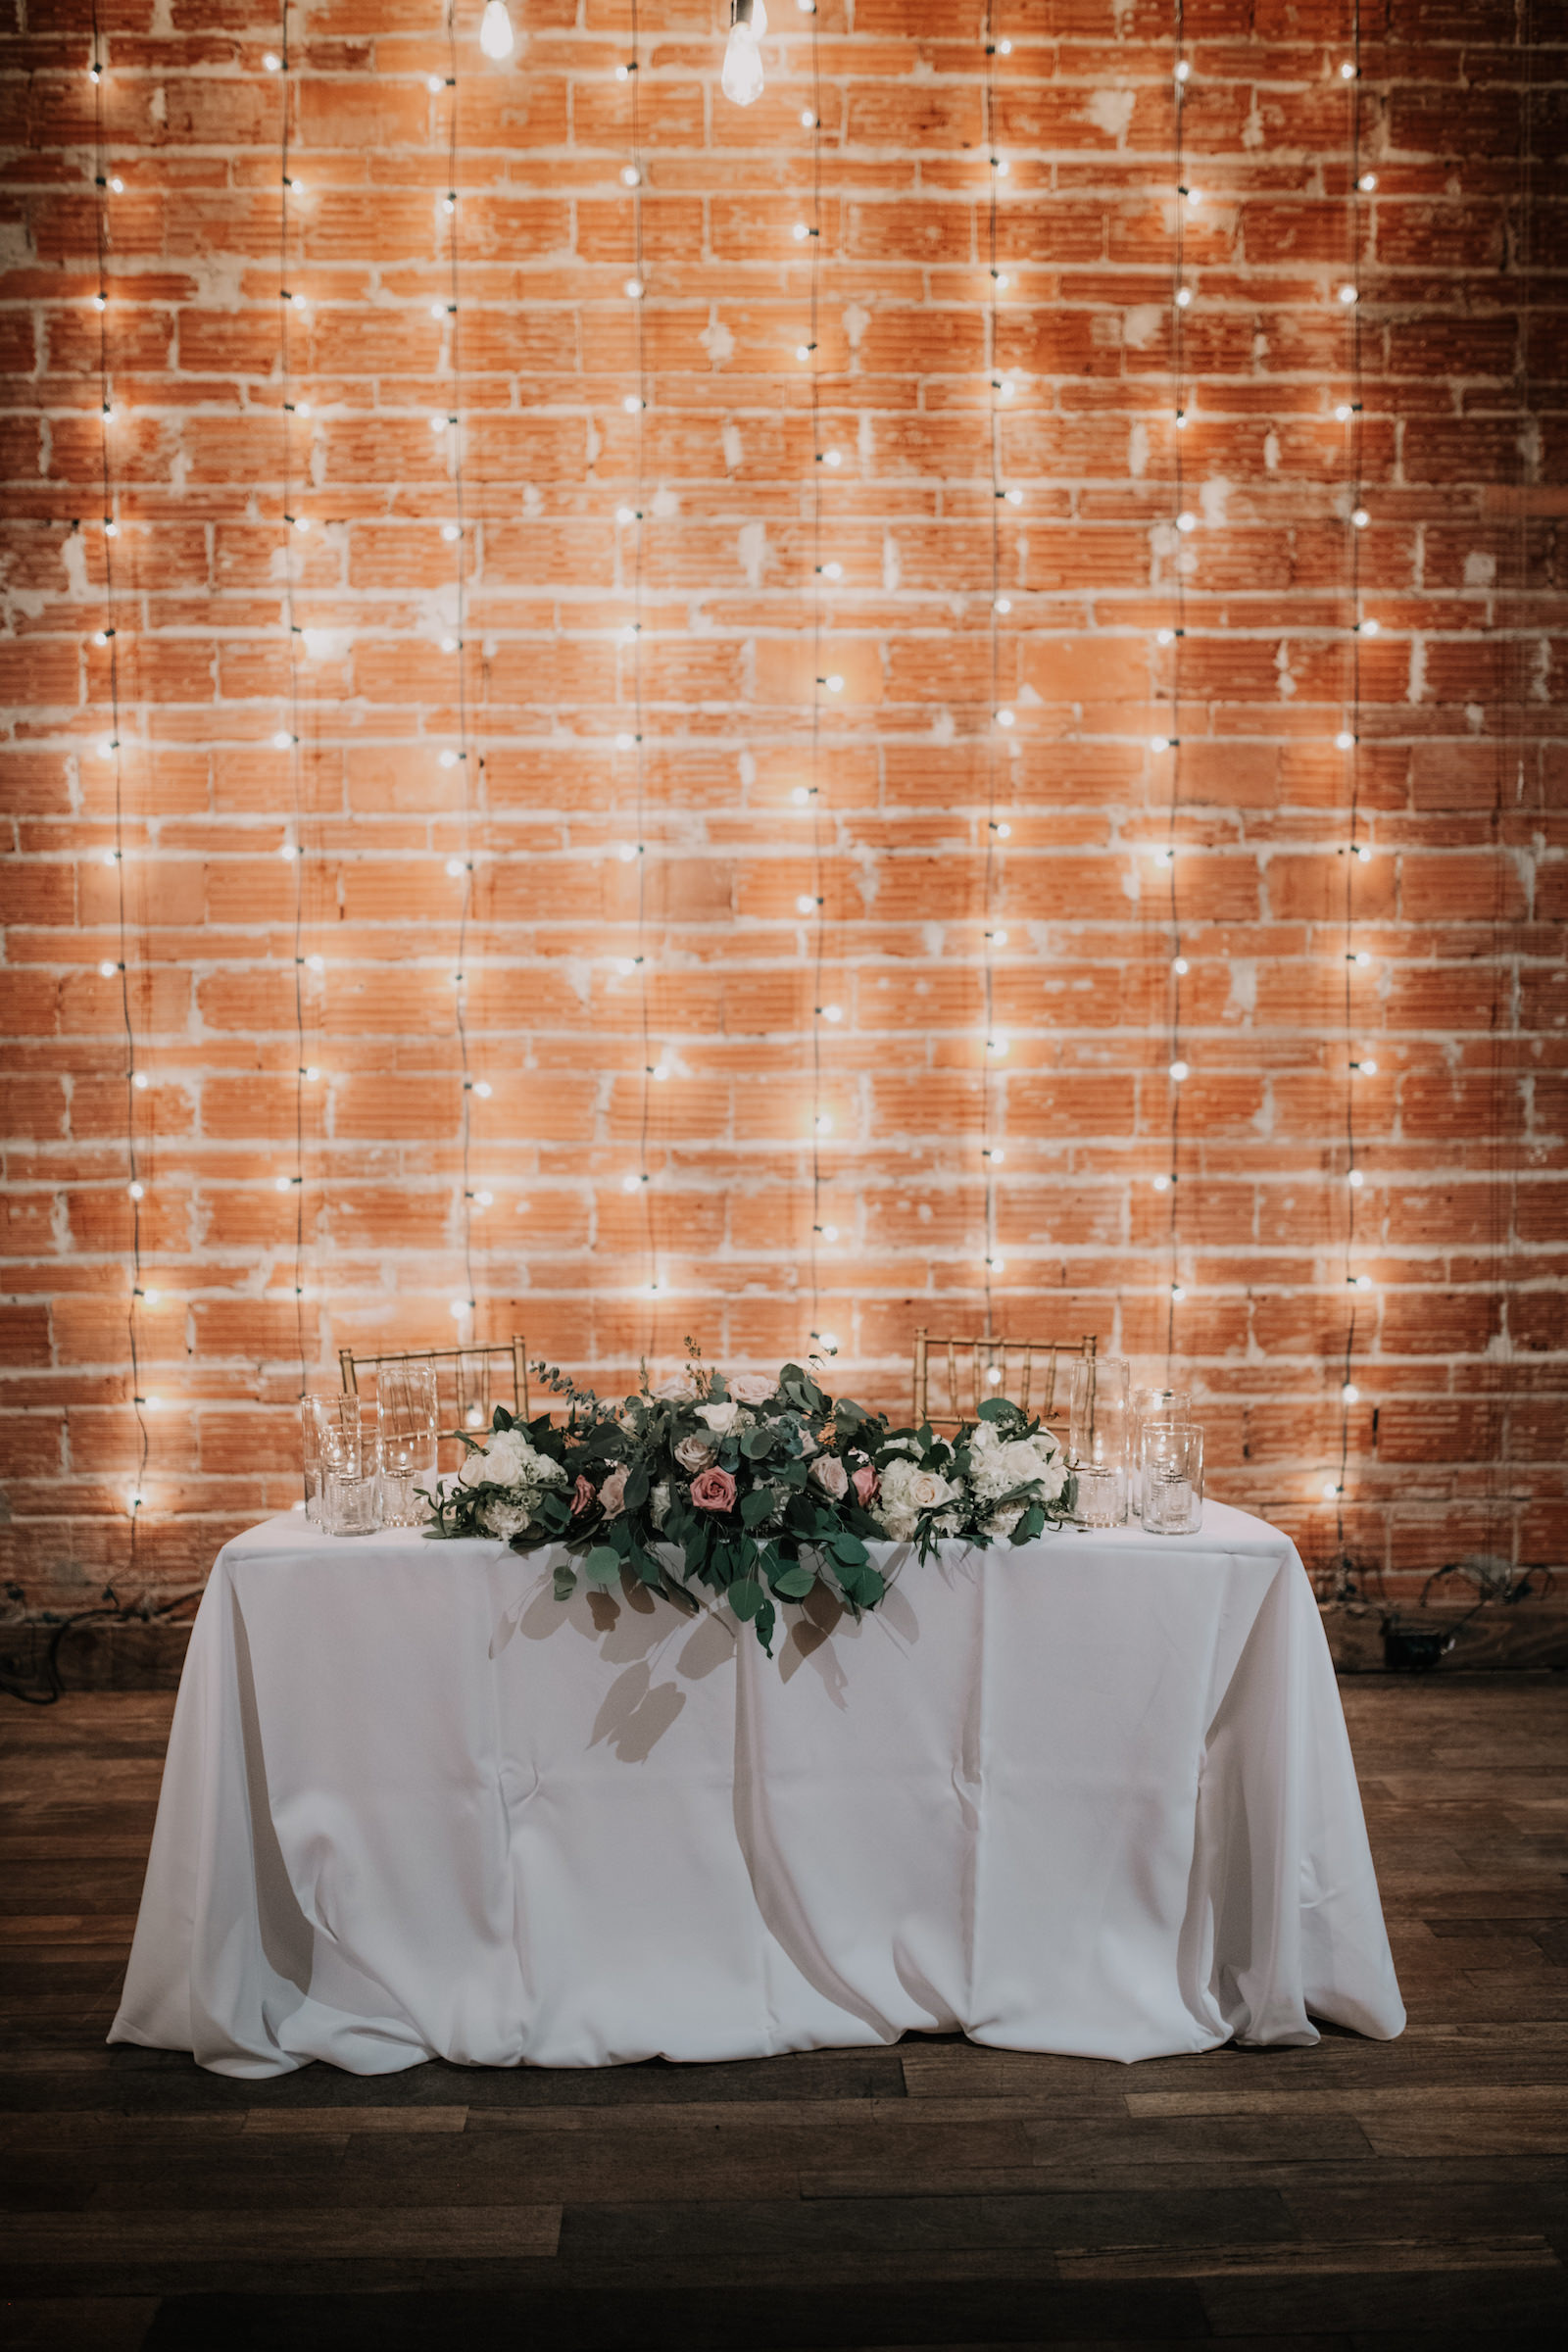 Elegant Wedding Reception Sweetheart Table, White Linens with Gold Chiavari Chairs, String-lighting against Exposed Red Brick Wall, Bridal Bouquet with Pink and White, Ivory Roses and Greenery Eucalyptus | Florida Historic Wedding Venue NOVA 535 | Tampa Bay Wedding Caterer Olympia Careering